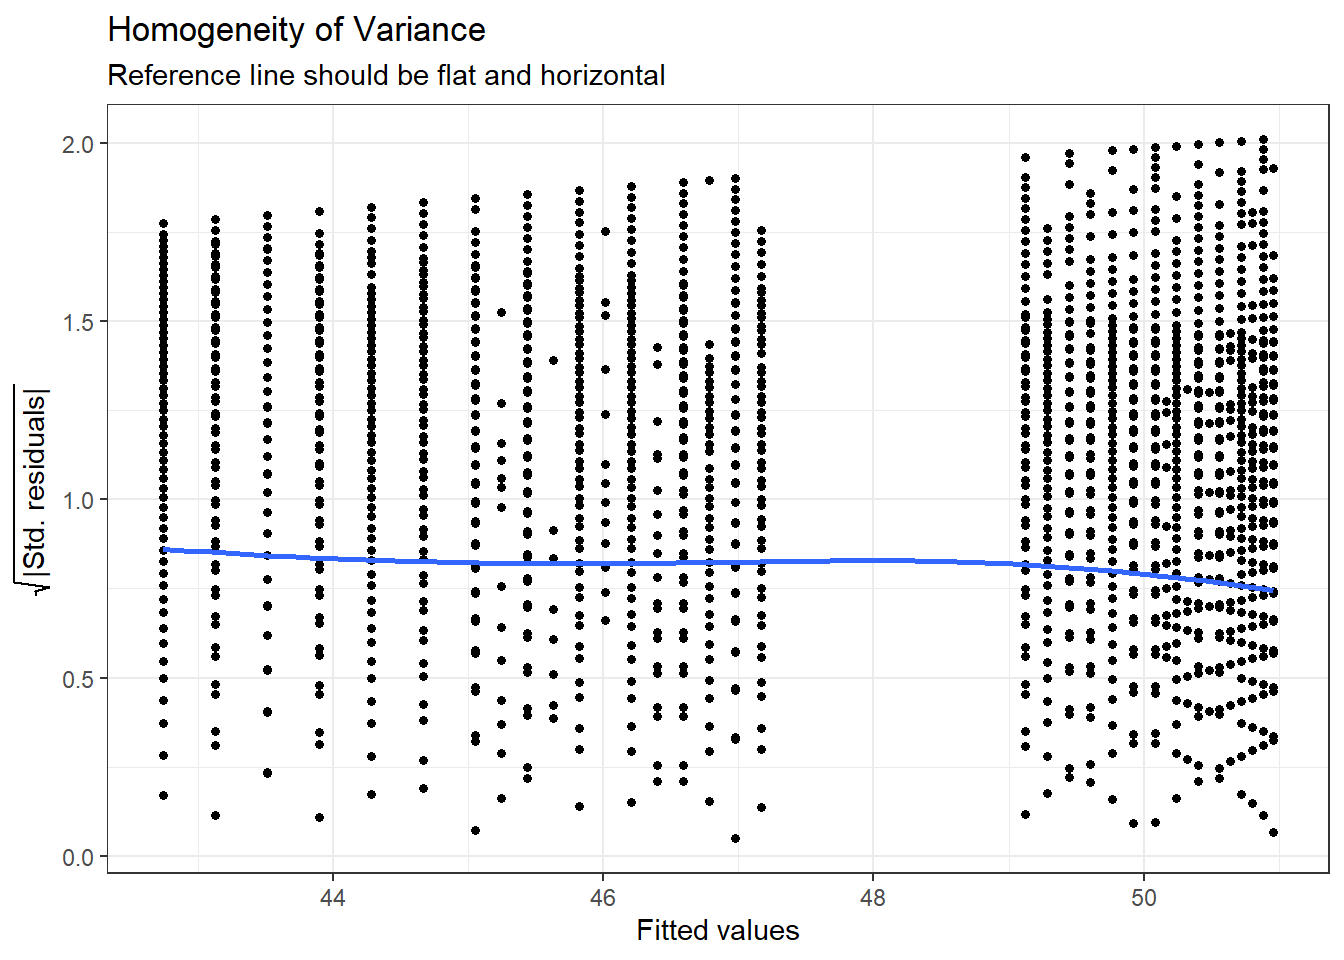 Adjusted homogeneity plot that will produce reference line